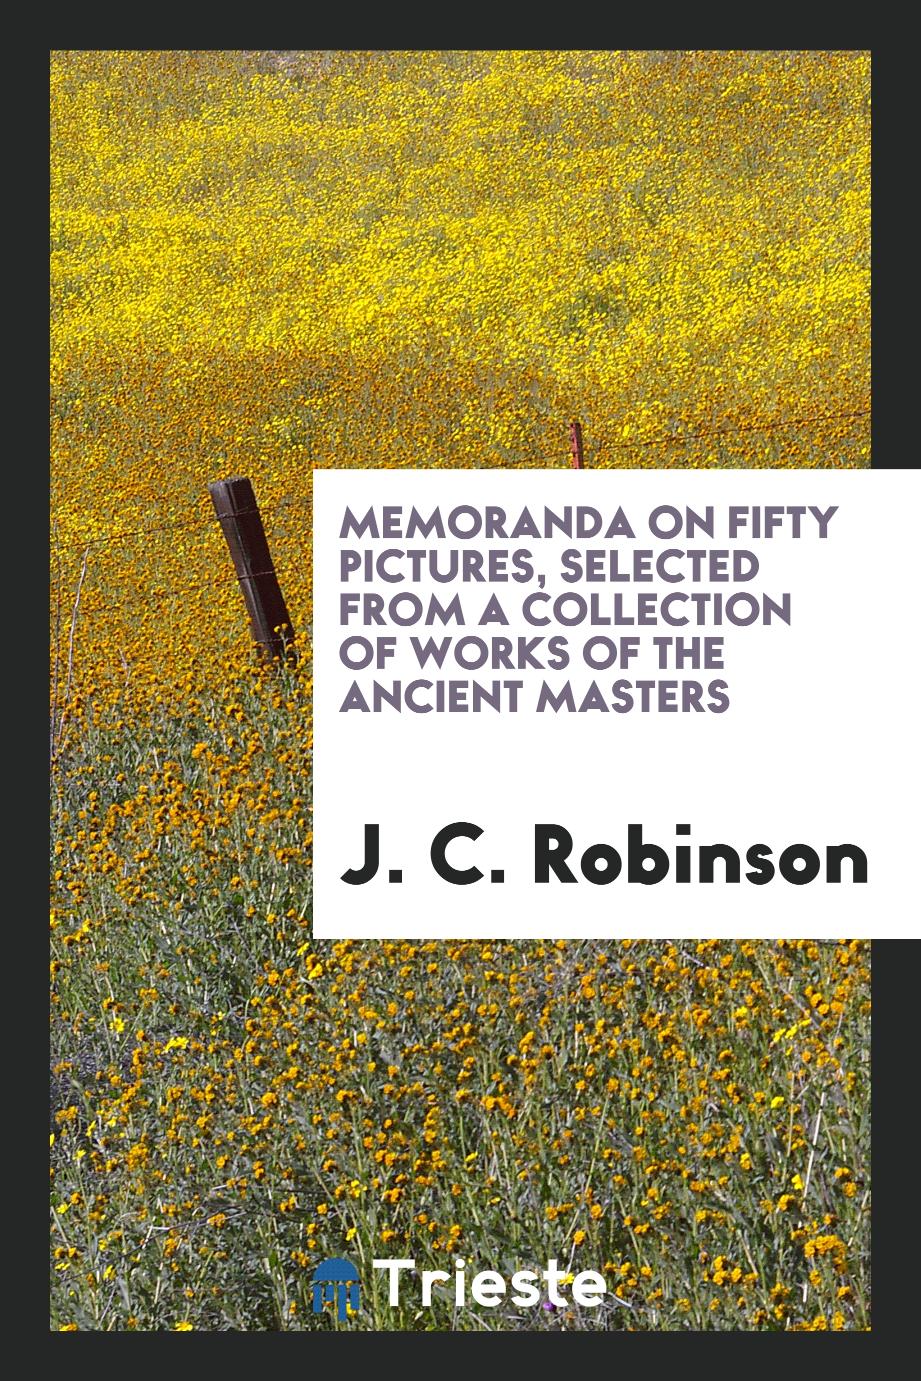 Memoranda on fifty pictures, selected from a collection of works of the ancient Masters